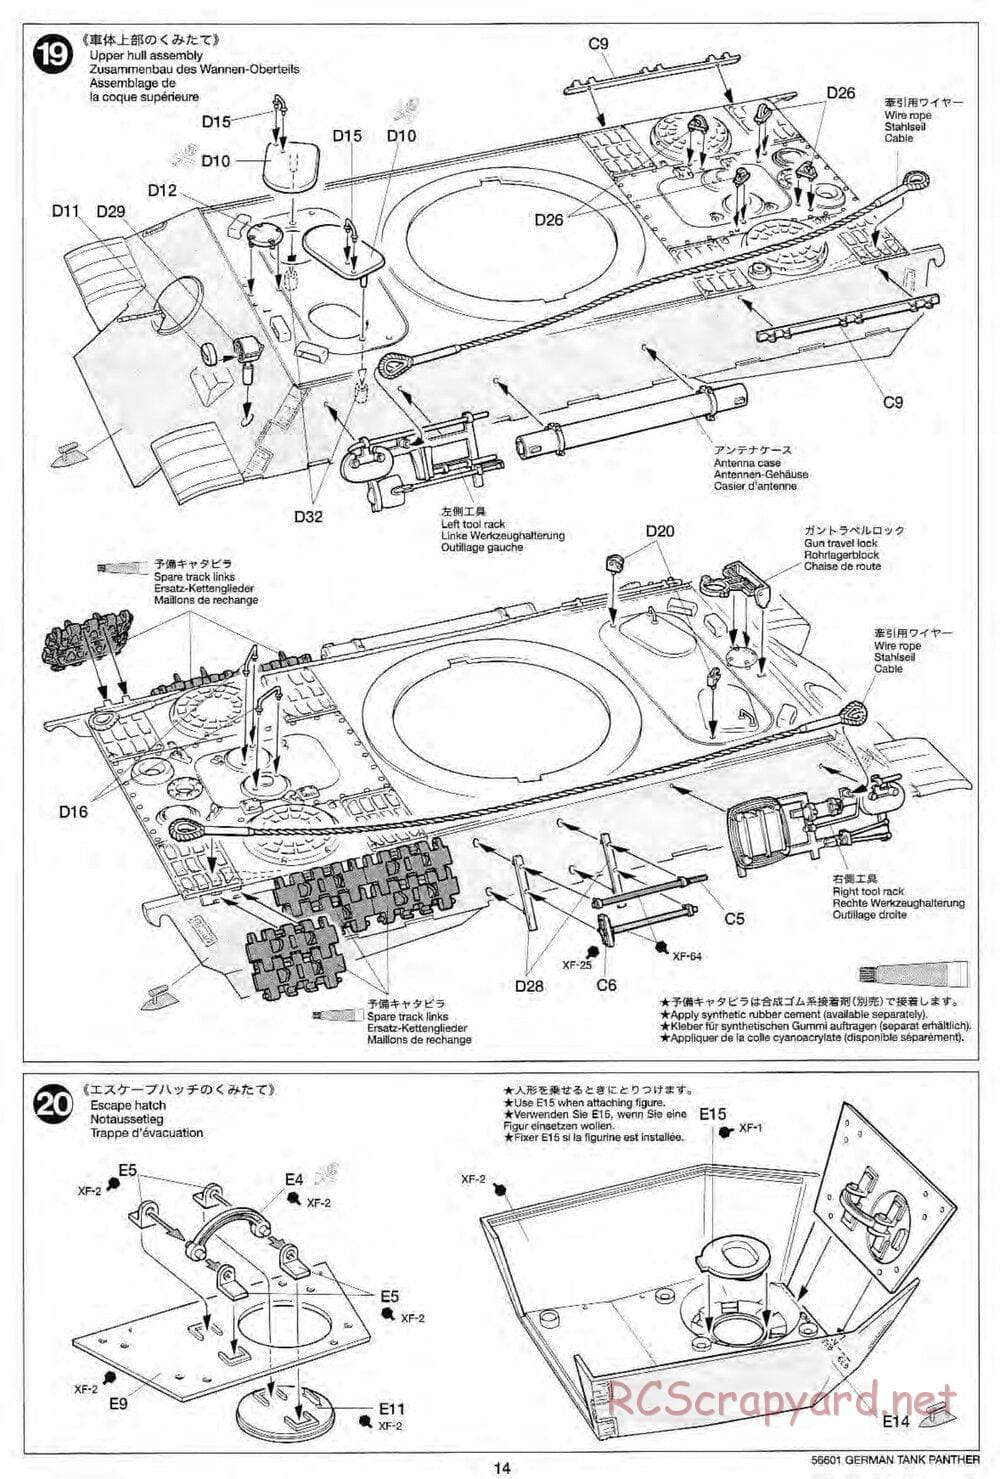 Tamiya - German Tank Panther A - 1/25 Scale Chassis - Manual - Page 14